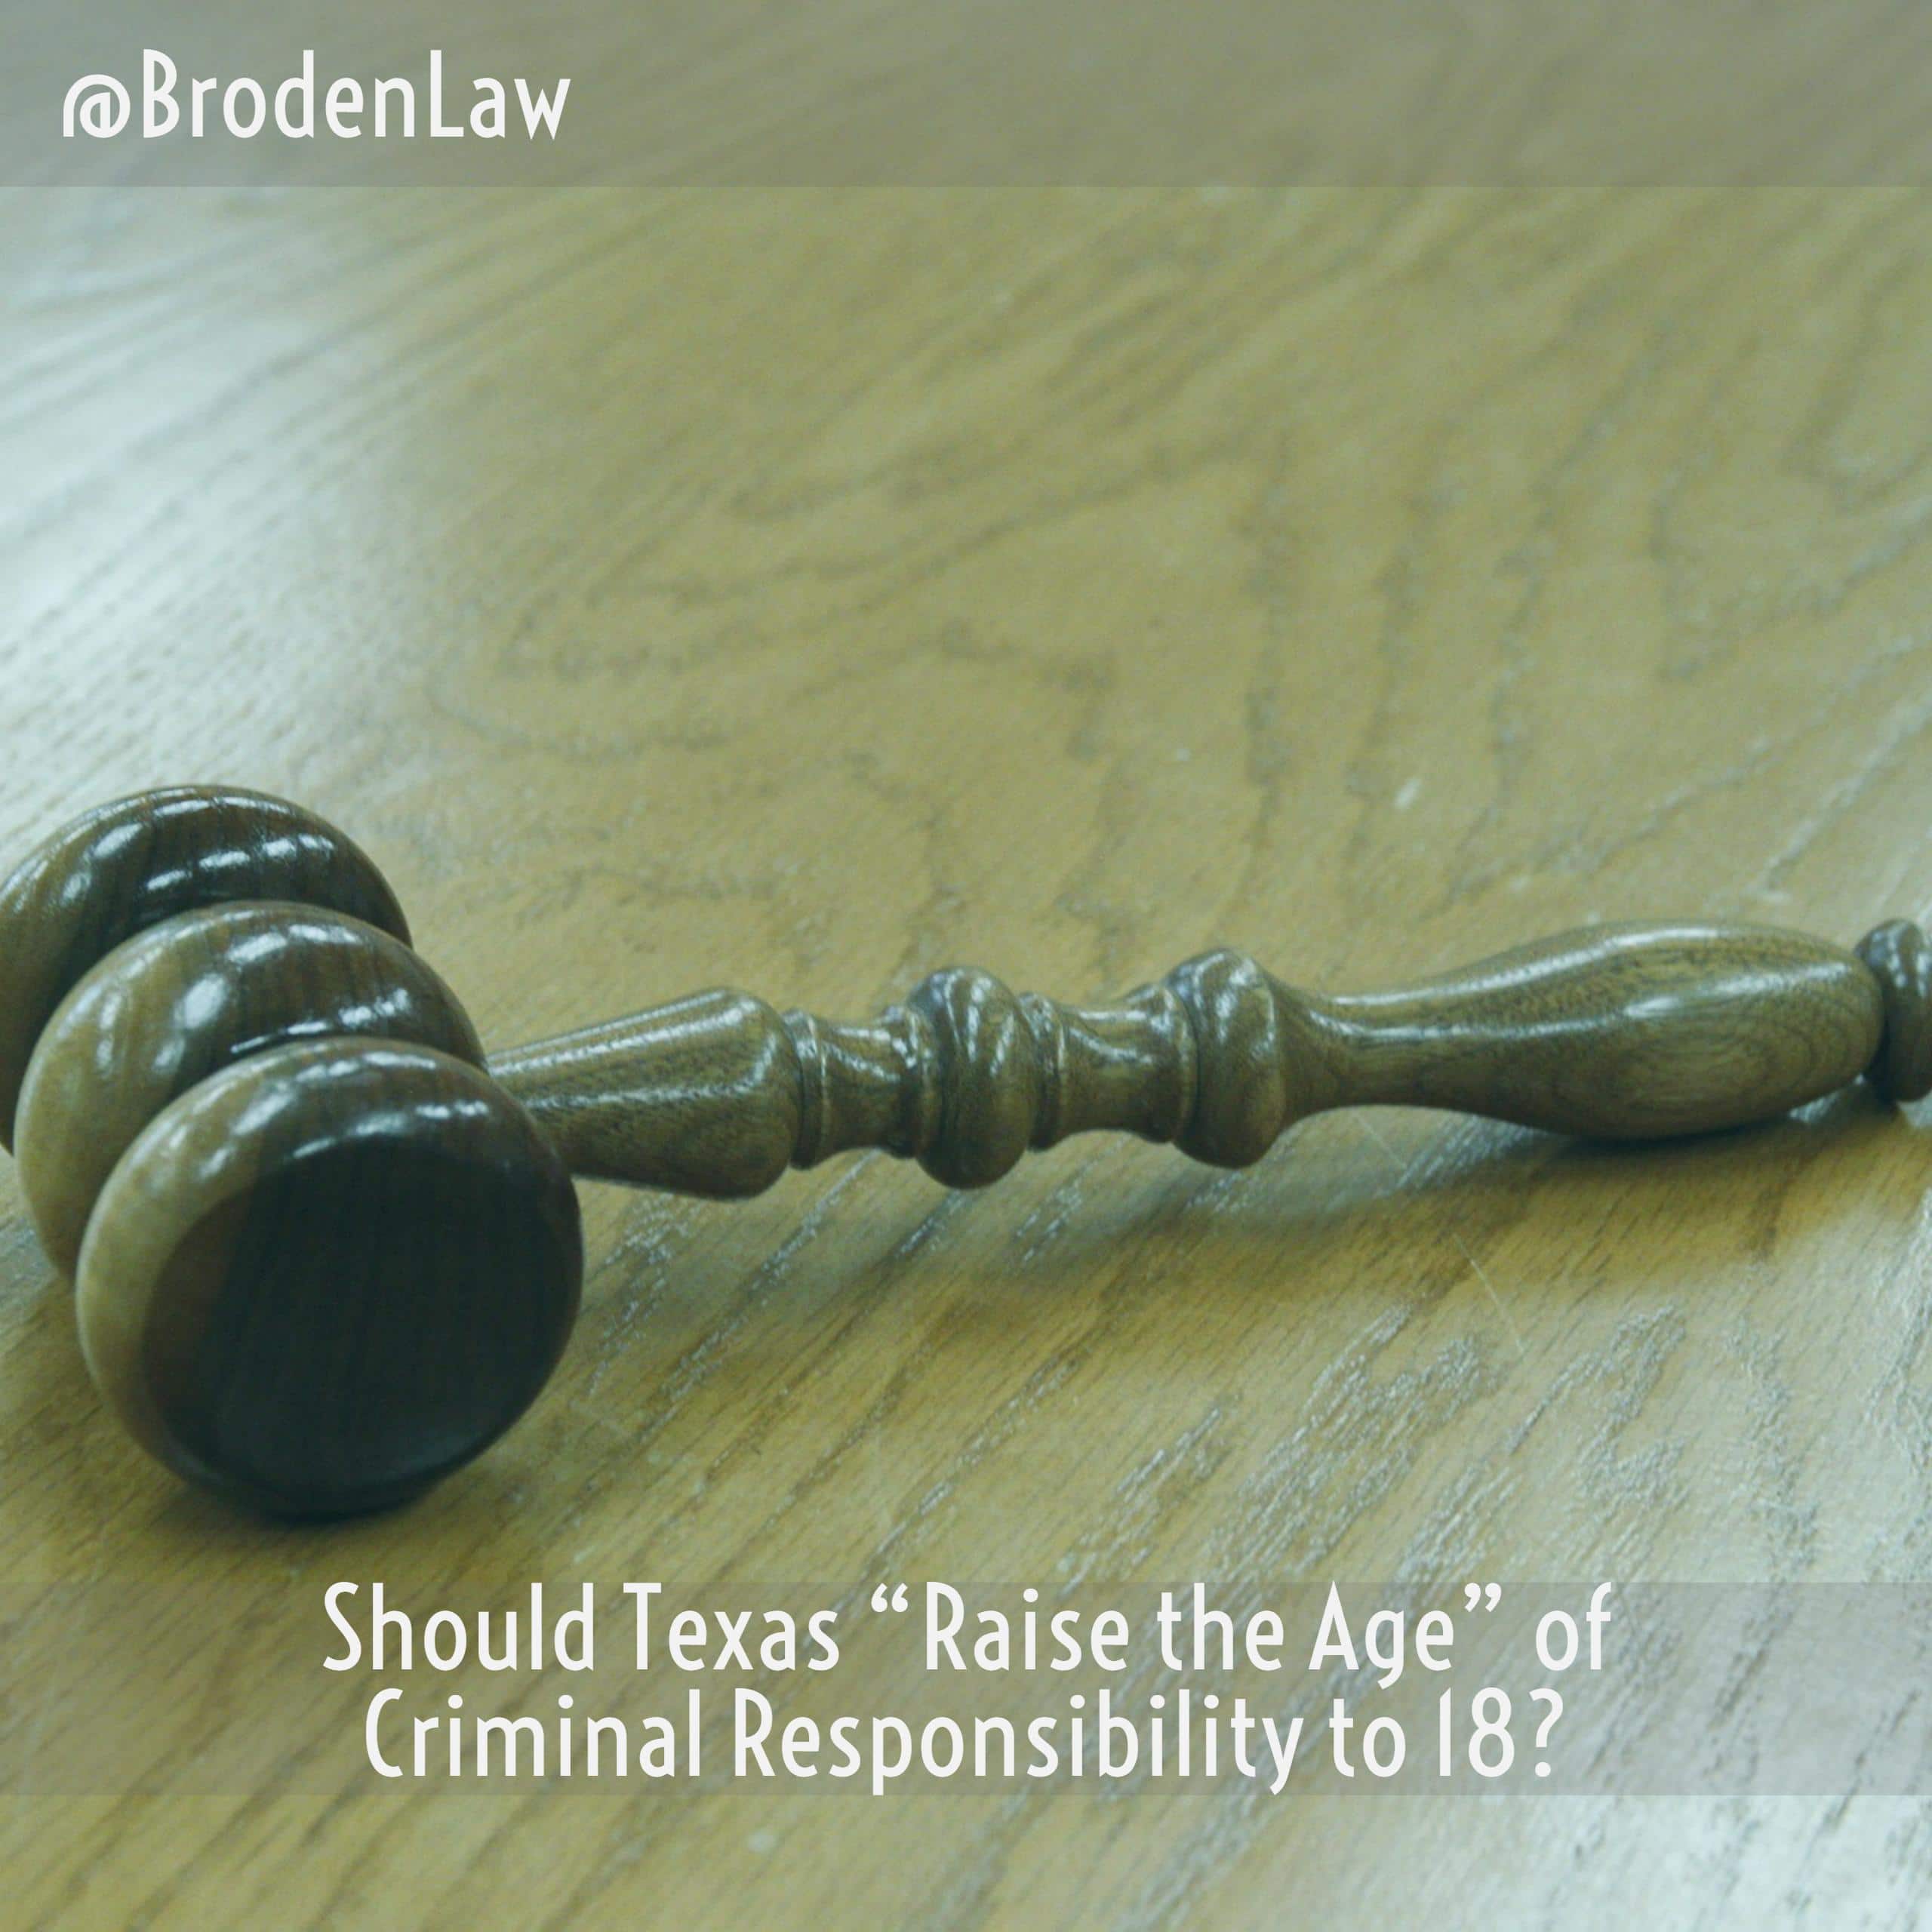 Should Texas “Raise the Age” of Criminal Responsibility to 18